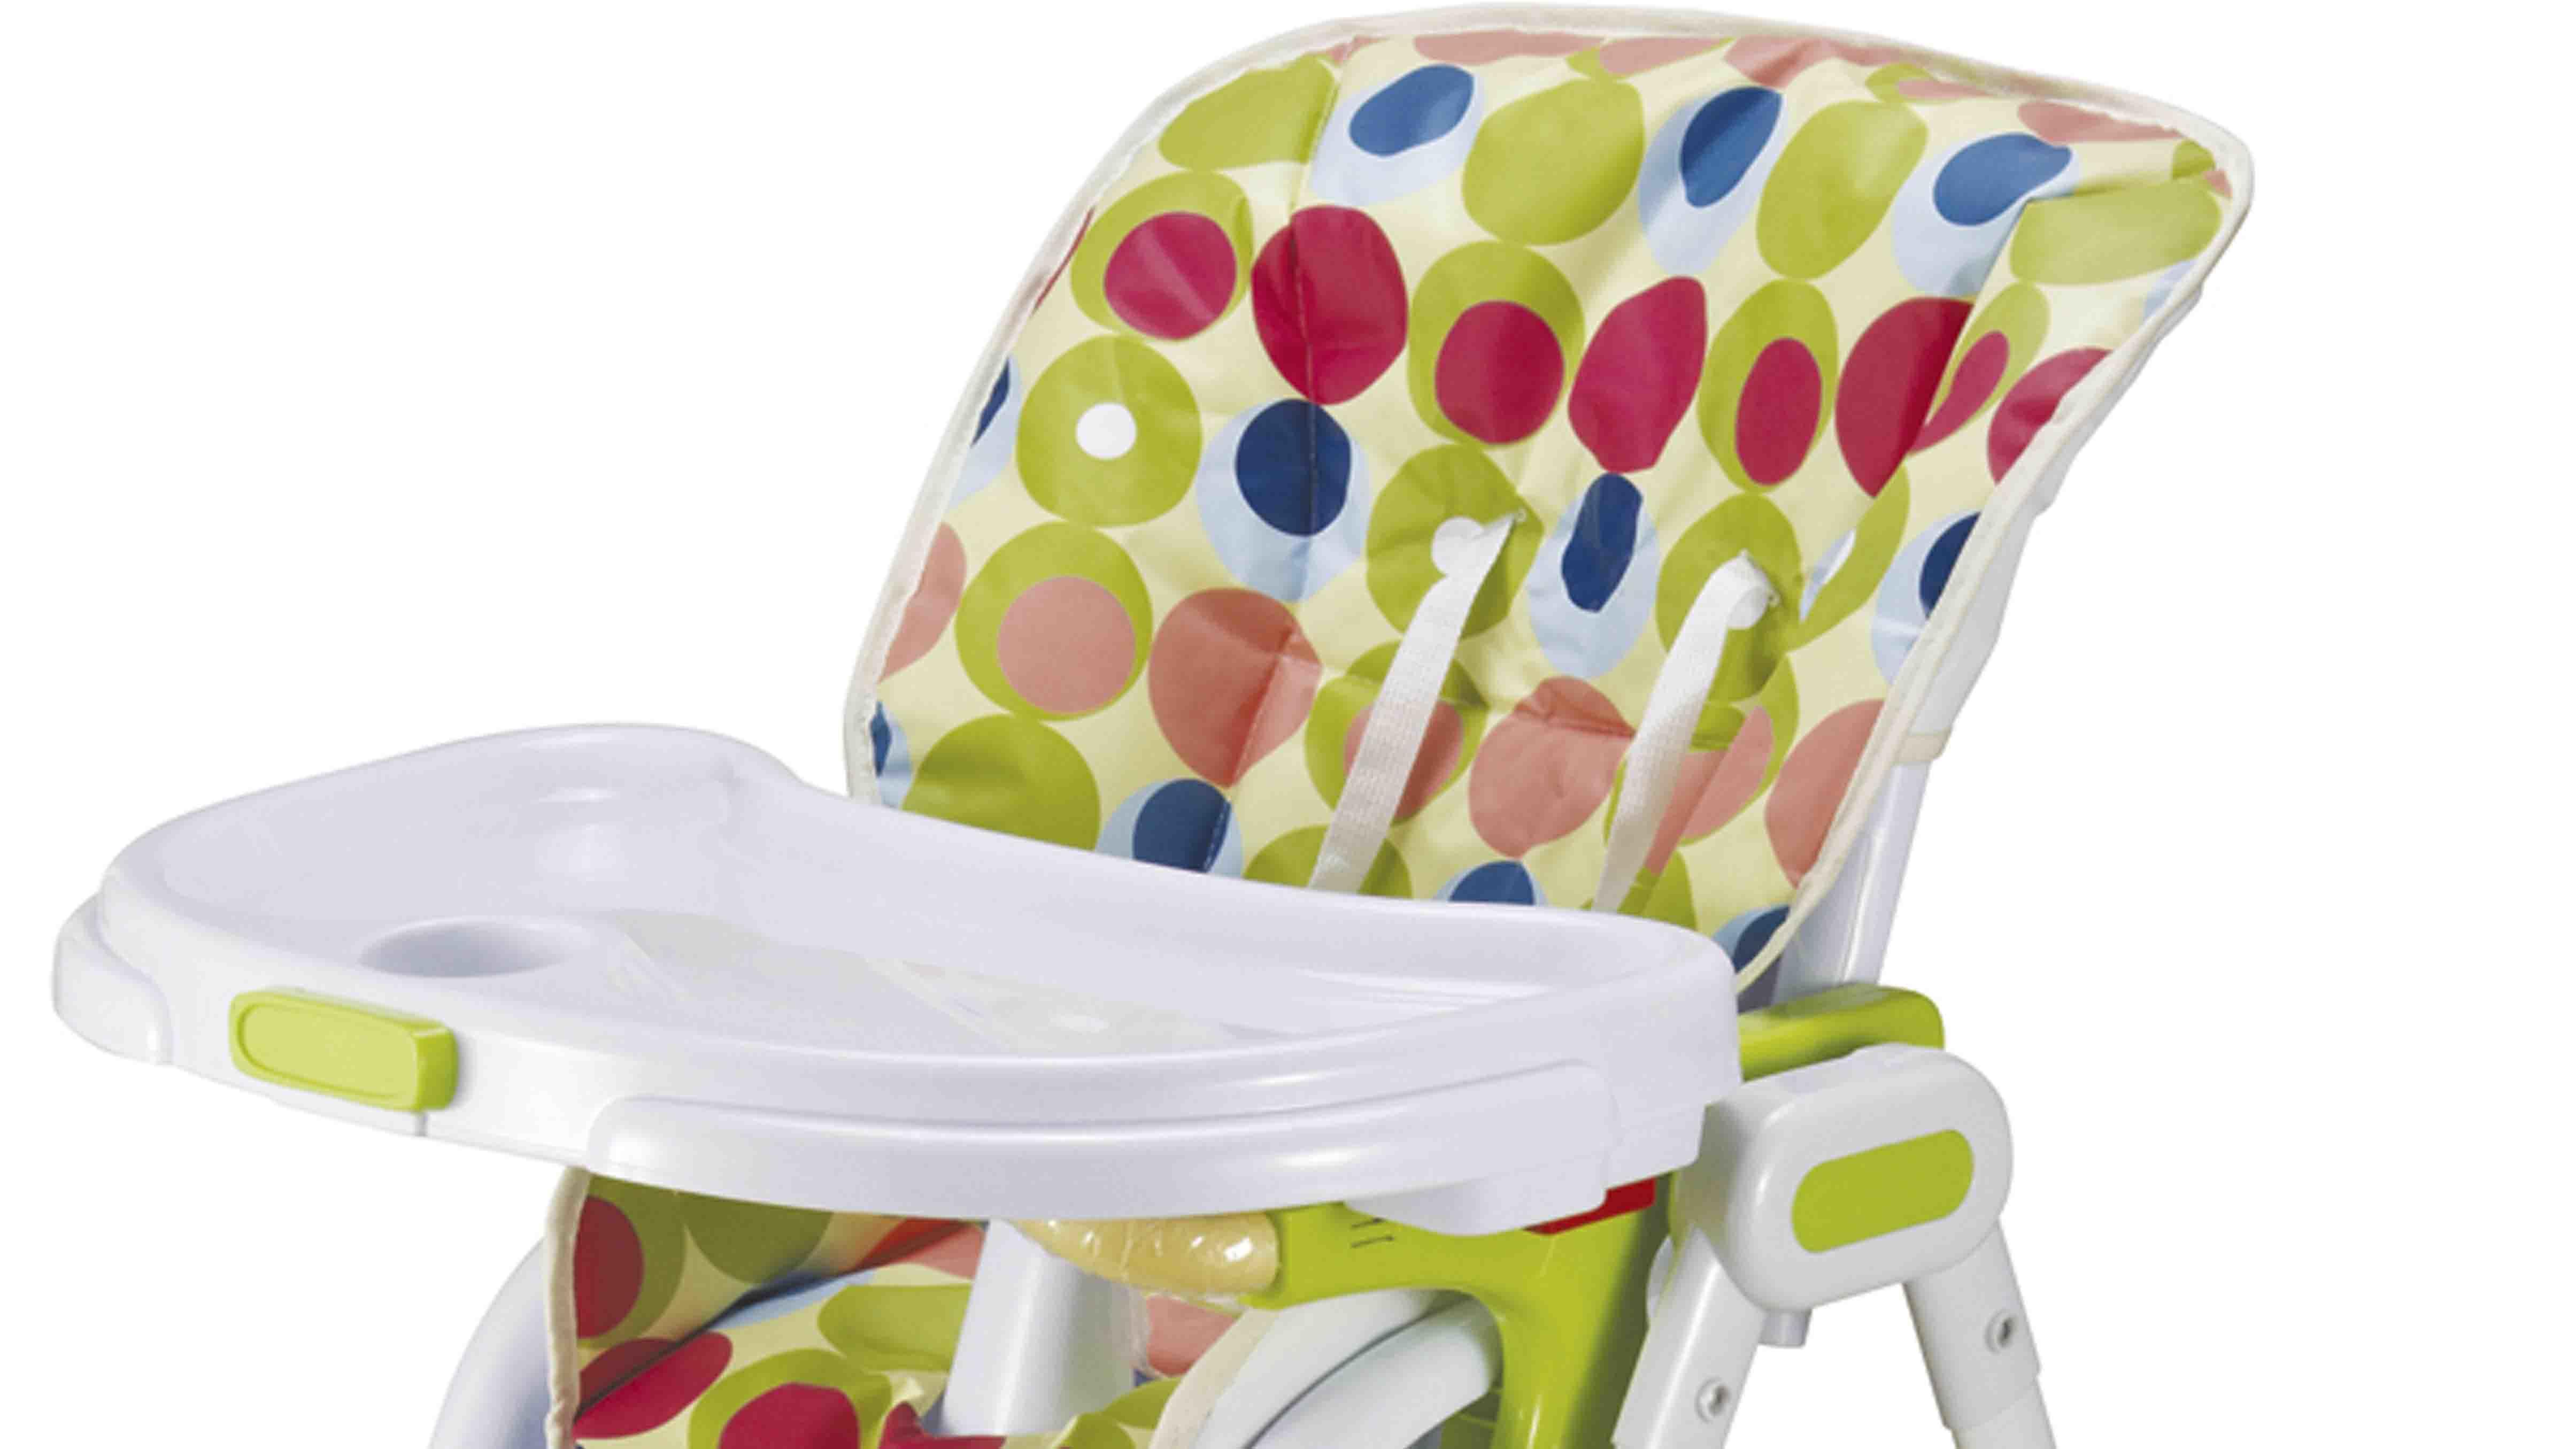 Aoqi foldable baby high chair manufacturer for livingroom-2